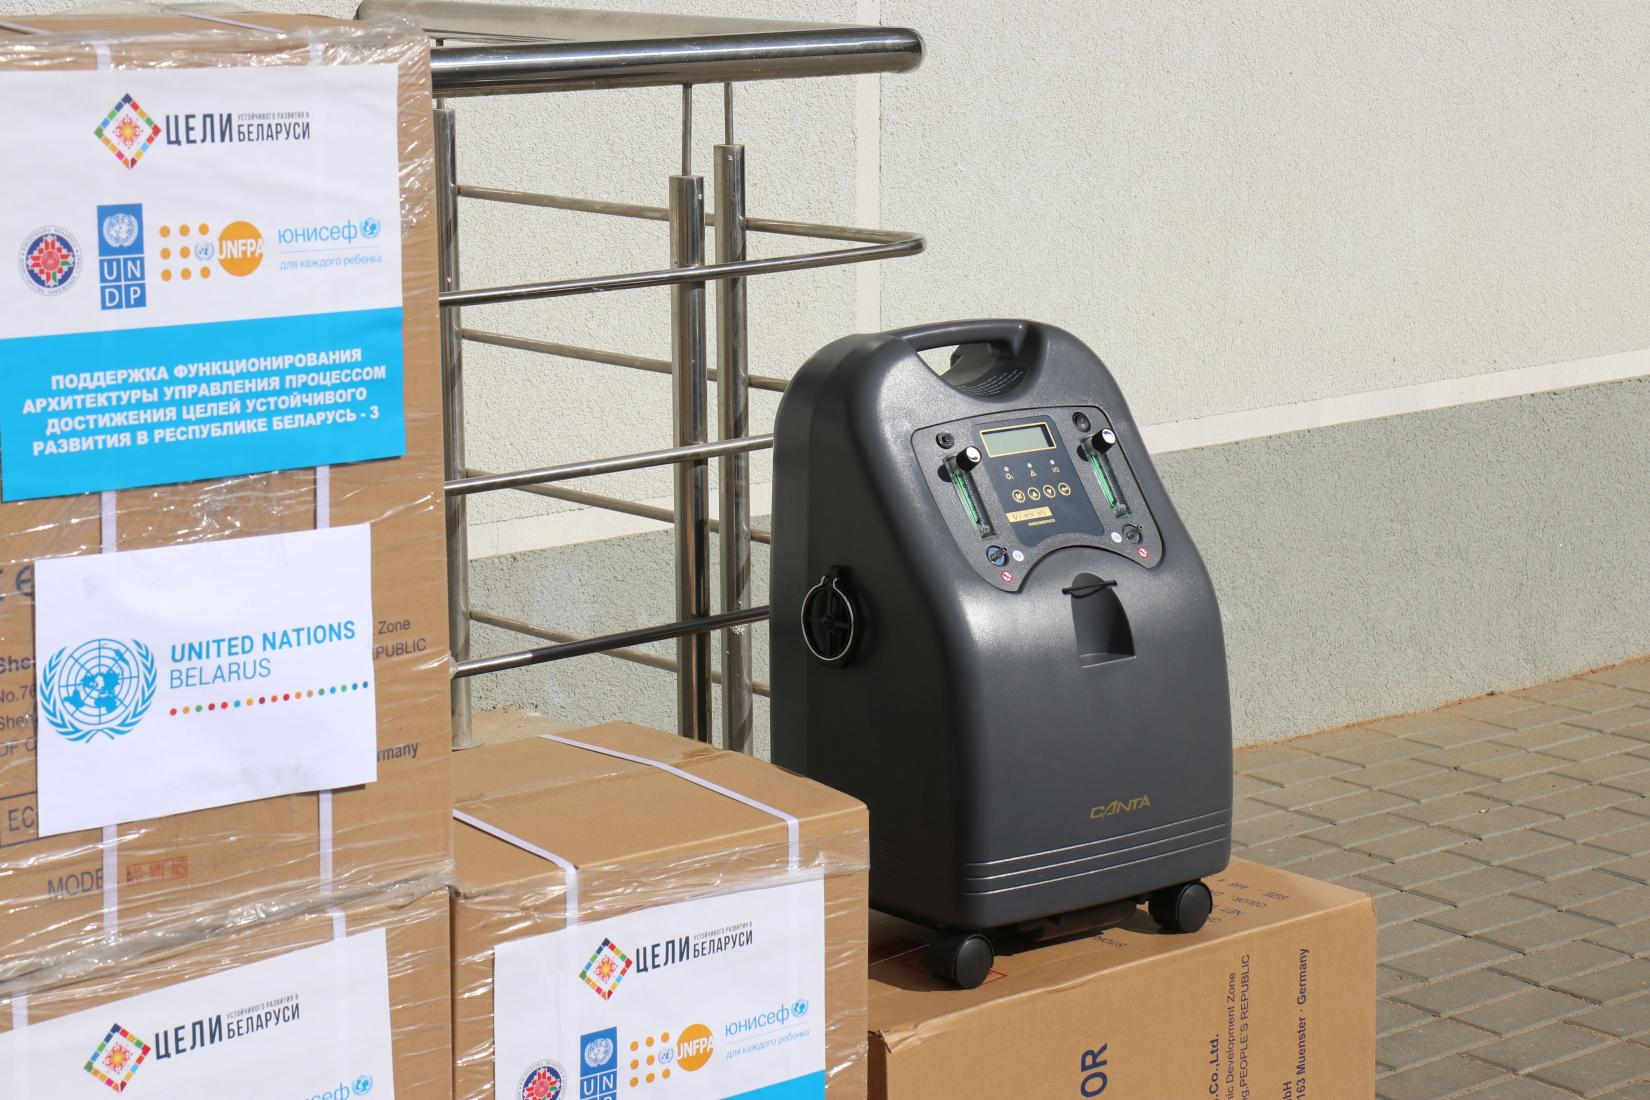 An oxygen concentrator helps patients who are critically ill due to CODID-19 disease.